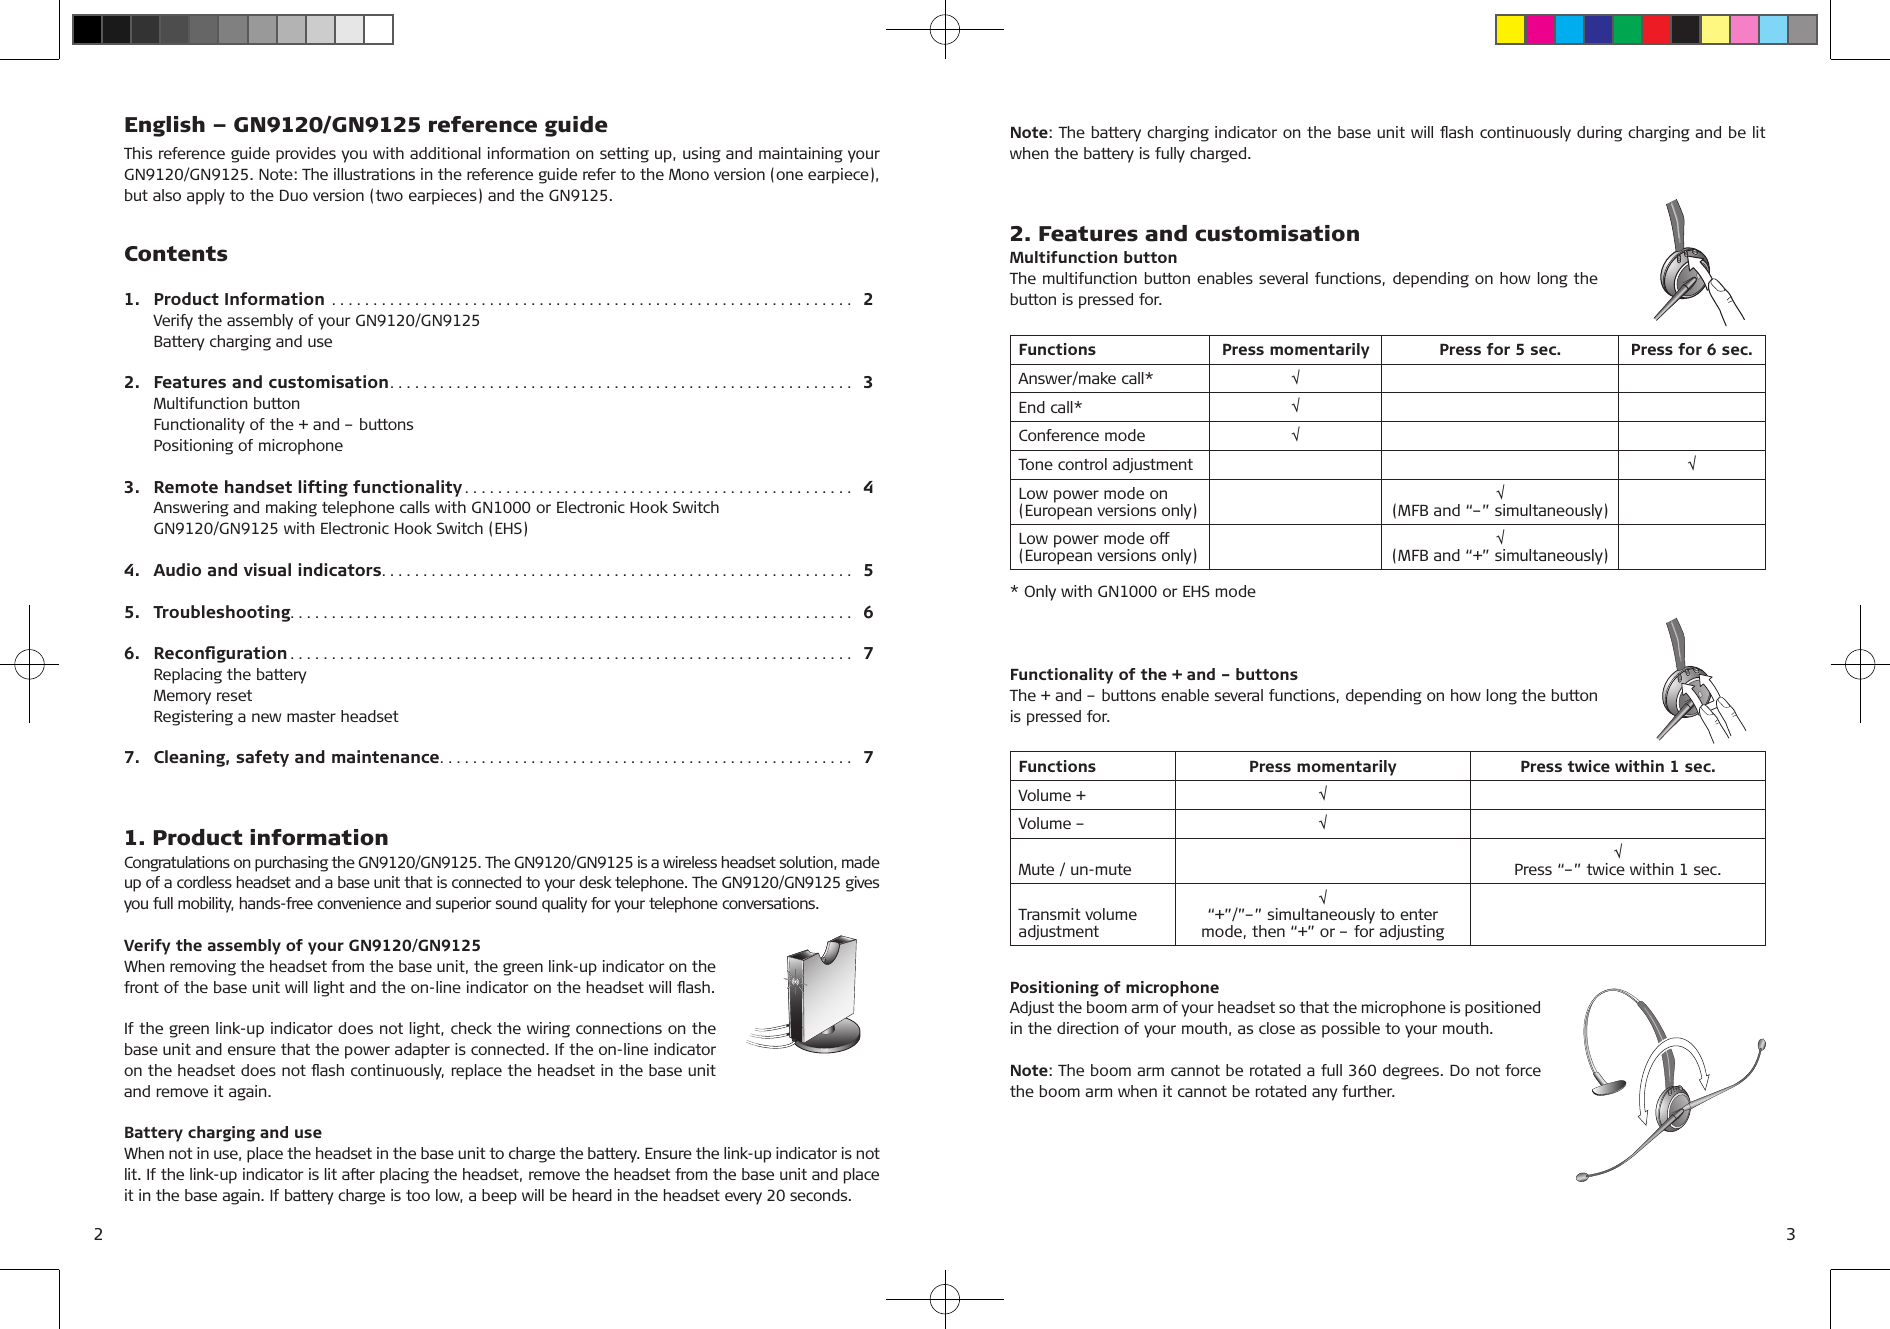 English – GN9120/GN9125 reference guideThis reference guide provides you with additional information on setting up, using and maintaining your  GN9120/GN9125. Note: The illustrations in the reference guide refer to the Mono version (one earpiece), but also apply to the Duo version (two earpieces) and the GN9125.Contents1.  Product Information  ...............................................................  2  Verify the assembly of your GN9120/GN9125  Battery charging and use2.  Features and customisation ........................................................  3  Multifunction button  Functionality of the + and – buttons  Positioning of microphone3.  Remote handset lifting functionality ...............................................  4  Answering and making telephone calls with GN1000 or Electronic Hook Switch  GN9120/GN9125 with Electronic Hook Switch (EHS)4.  Audio and visual indicators .........................................................  55.  Troubleshooting. . . . . . . . . . . . . . . . . . . . . . . . . . . . . . . . . . . . . . . . . . . . . . . . . . . . . . . . . . . . . . . . . . . .  66.  Reconﬁguration ....................................................................  7  Replacing the battery  Memory reset  Registering a new master headset7.  Cleaning, safety and maintenance ..................................................  71. Product informationCongratulations on purchasing the GN9120/GN9125. The GN9120/GN9125 is a wireless headset solution, made up of a cordless headset and a base unit that is connected to your desk telephone. The GN9120/GN9125 gives you full mobility, hands-free convenience and superior sound quality for your telephone conversations.Verify the assembly of your GN9120/GN9125When removing the headset from the base unit, the green link-up indicator on the front of the base unit will light and the on-line indicator on the headset will ﬂash. If the green link-up indicator does not light, check the wiring connections on the base unit and ensure that the power adapter is connected. If the on-line indicator on the headset does not ﬂash continuously, replace the headset in the base unit and remove it again. Battery charging and useWhen not in use, place the headset in the base unit to charge the battery. Ensure the link-up indicator is not lit. If the link-up indicator is lit after placing the headset, remove the headset from the base unit and place it in the base again. If battery charge is too low, a beep will be heard in the headset every 20 seconds.Note: The battery charging indicator on the base unit will ﬂash continuously during charging and be lit when the battery is fully charged.2. Features and customisationMultifunction buttonThe multifunction button enables several functions, depending on how long the button is pressed for.Functions Press momentarily Press for 5 sec. Press for 6 sec.Answer/make call* √End call* √Conference mode √Tone control adjustment √Low power mode on(European versions only) √(MFB and “–” simultaneously)Low power mode off(European versions only) √(MFB and “+” simultaneously)* Only with GN1000 or EHS modeFunctionality of the + and – buttonsThe + and – buttons enable several functions, depending on how long the button is pressed for.Functions Press momentarily Press twice within 1 sec.Volume + √Volume – √Mute / un-mute √Press “–” twice within 1 sec.Transmit volume  adjustment√“+”/”–” simultaneously to enter mode, then “+” or – for adjustingPositioning of microphoneAdjust the boom arm of your headset so that the microphone is positioned in the direction of your mouth, as close as possible to your mouth. Note: The boom arm cannot be rotated a full 360 degrees. Do not force the boom arm when it cannot be rotated any further.2 3